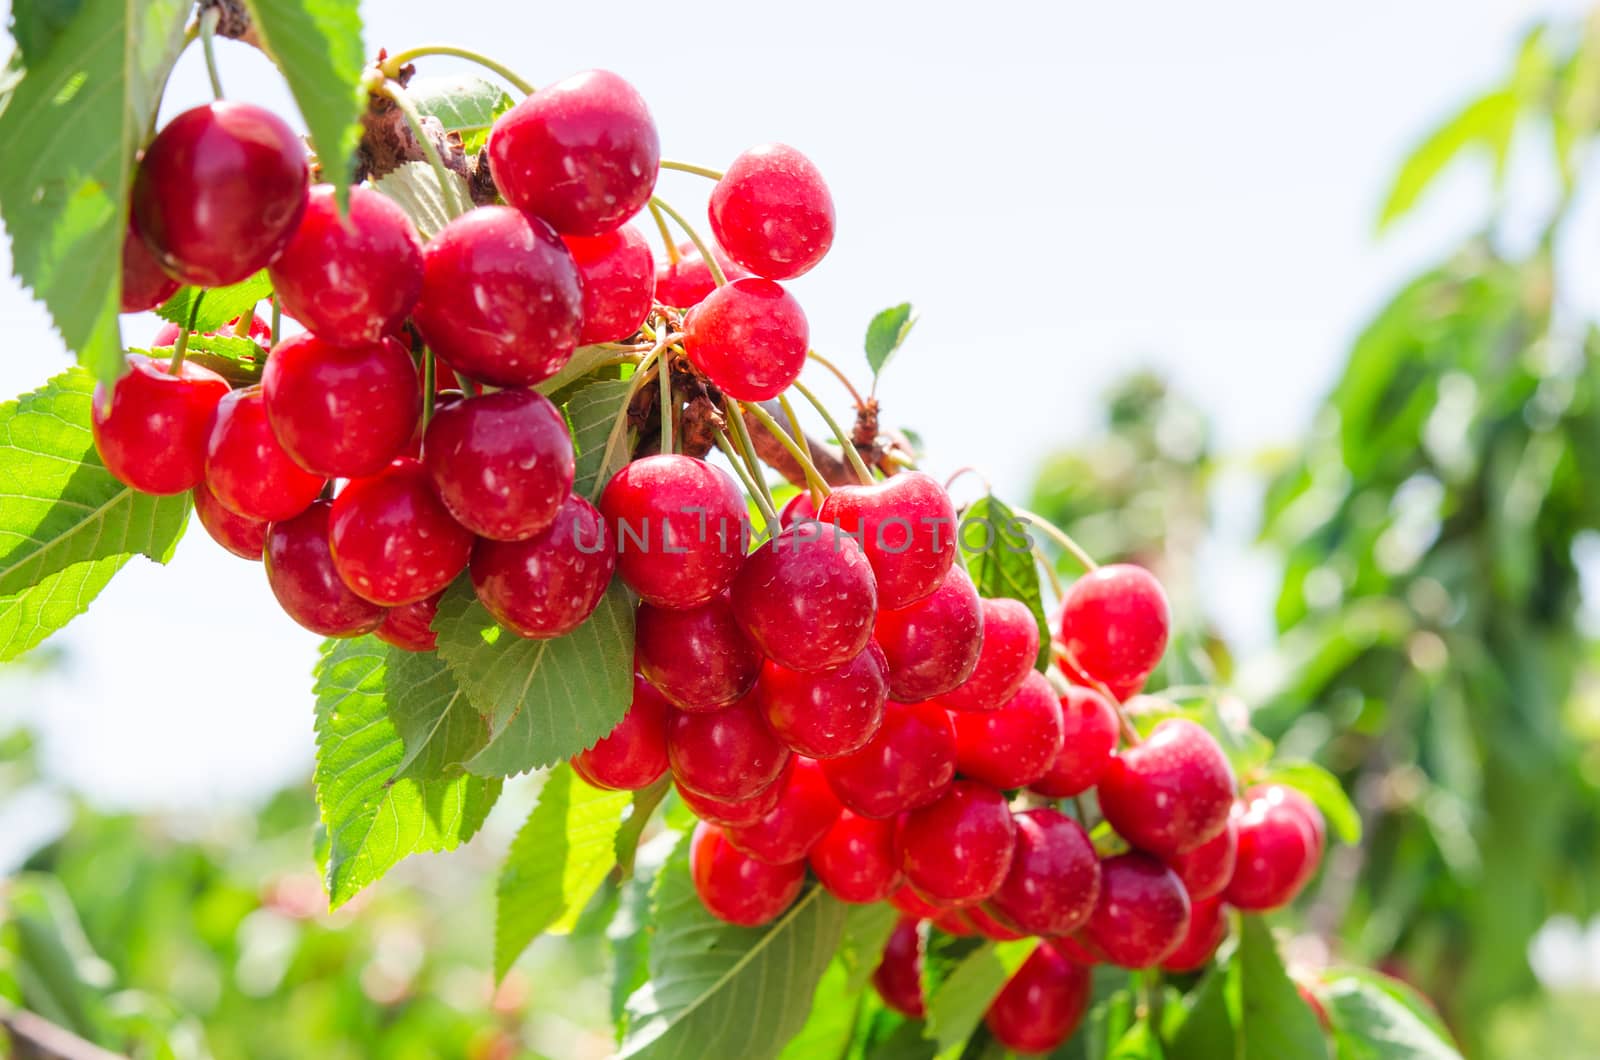 Sunlit branch of cherry berry tree with ripe sweet fruits